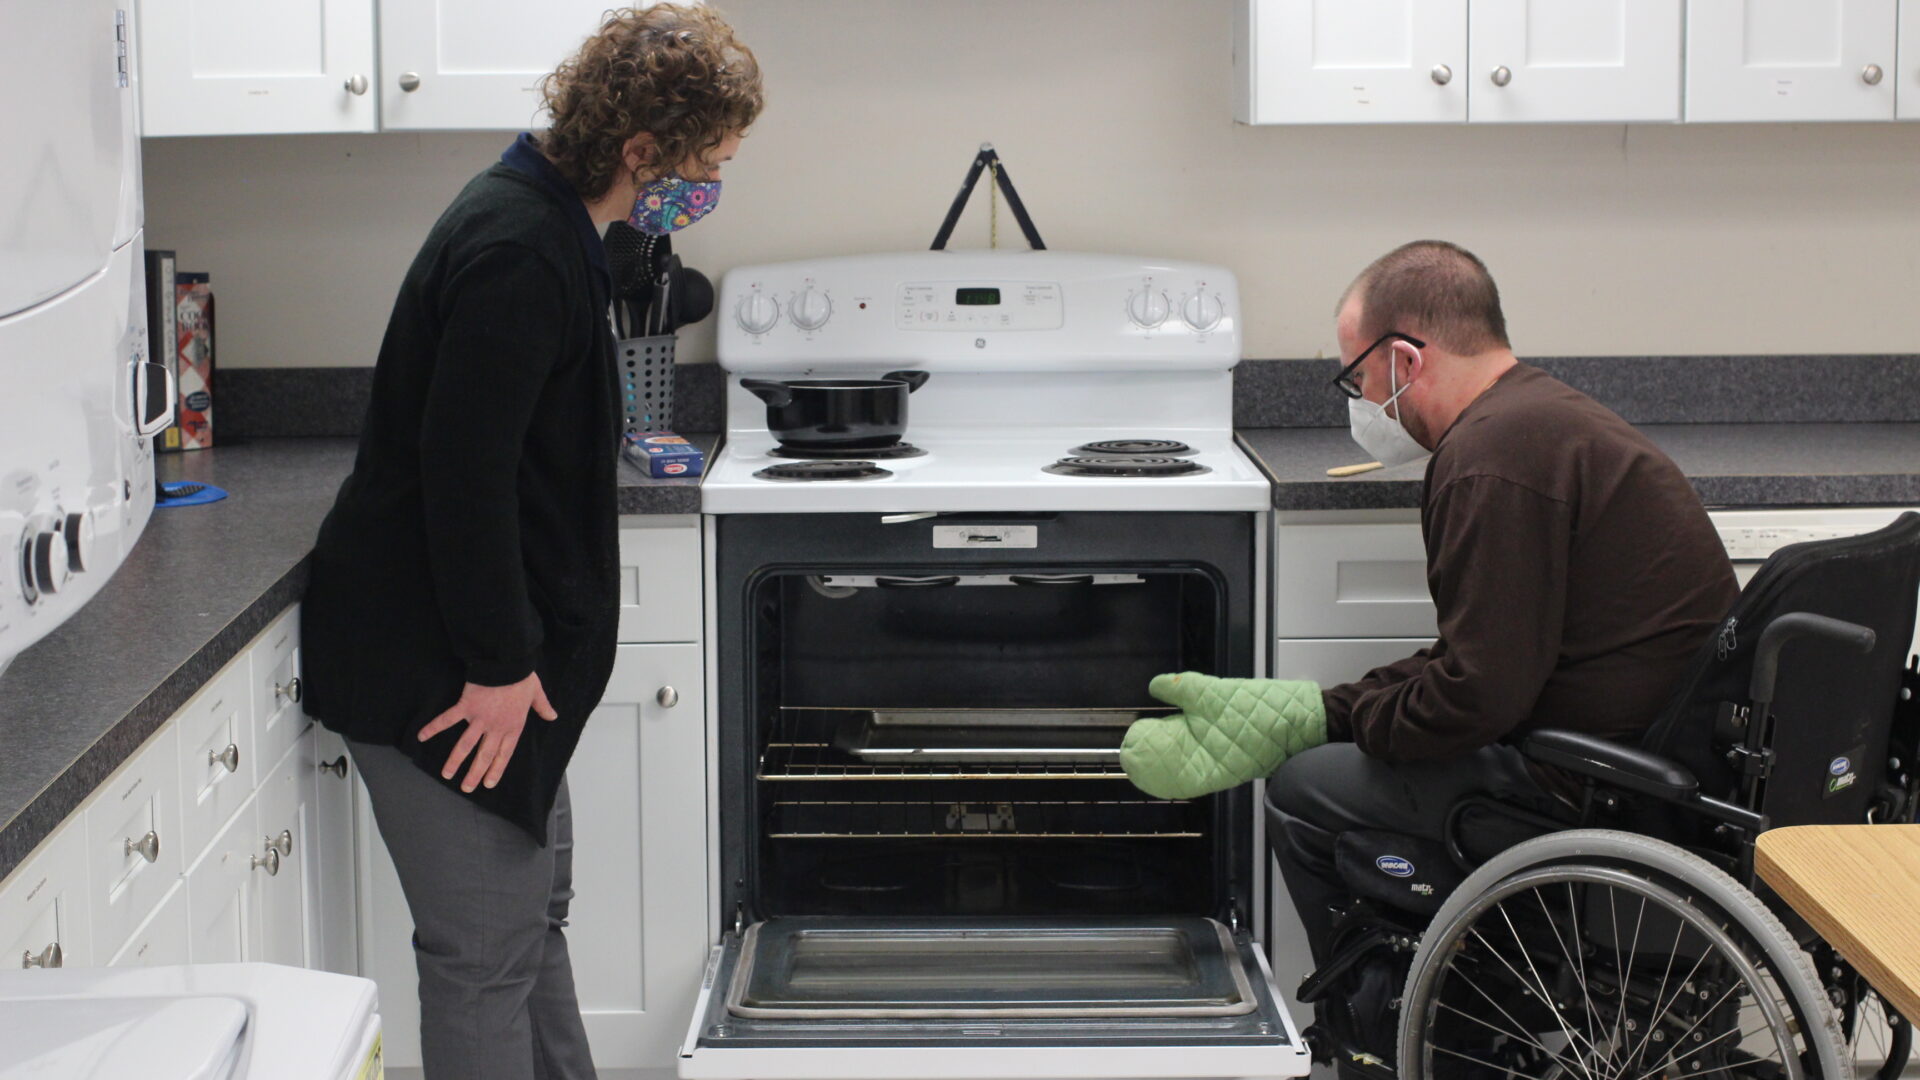 A Bancroft Neuro Rehab clinician and patient in a wheelchair are in a kitchen. They are both looking inside an open oven.